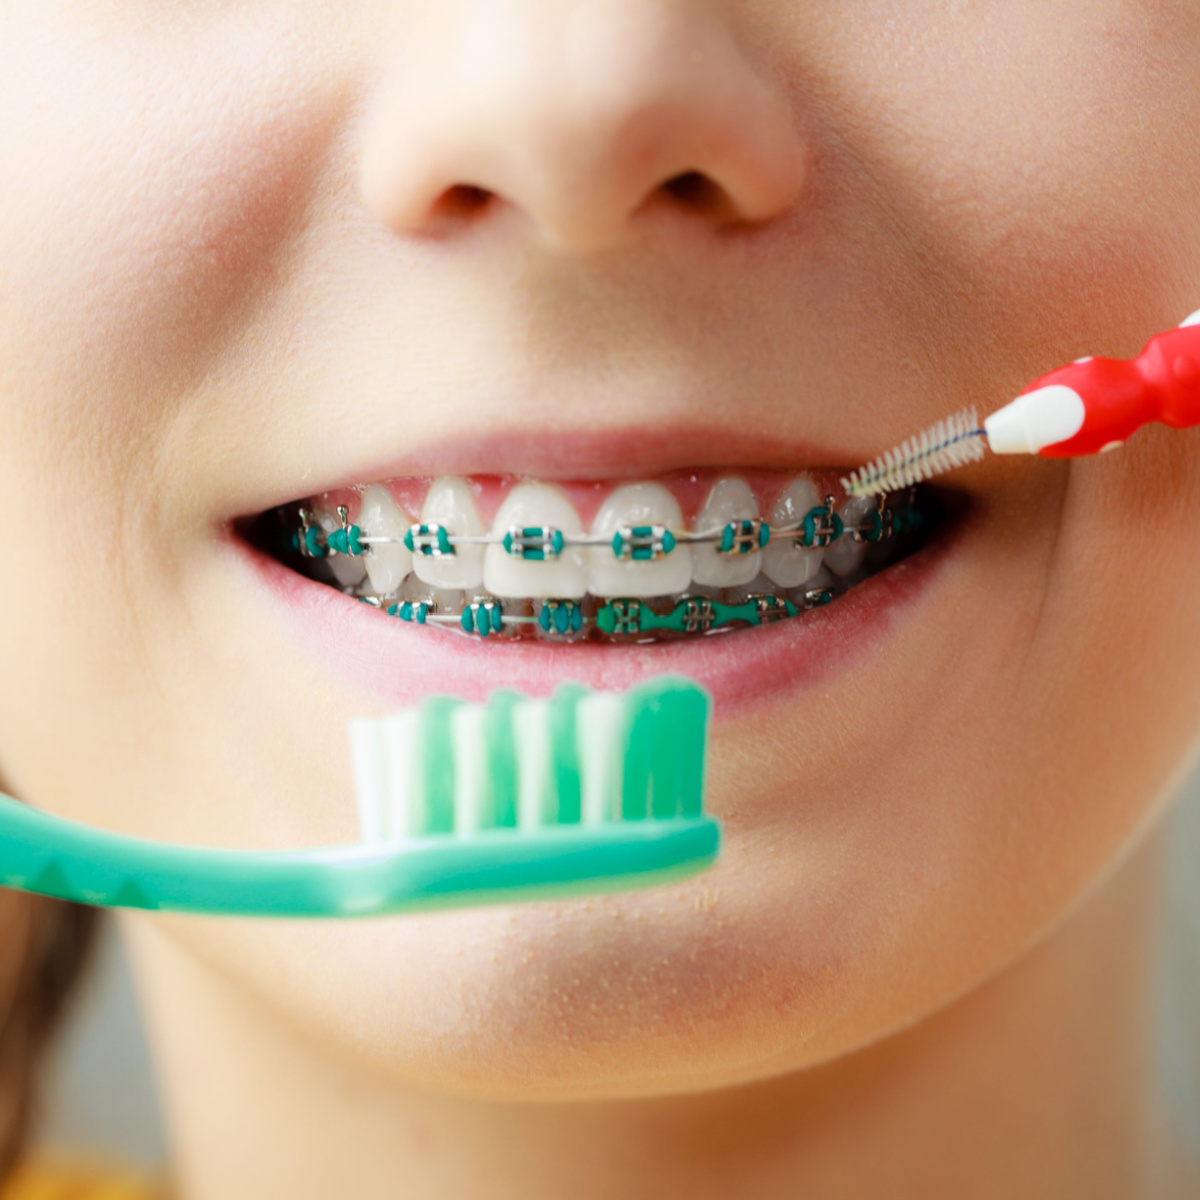 Cleaning dental braces